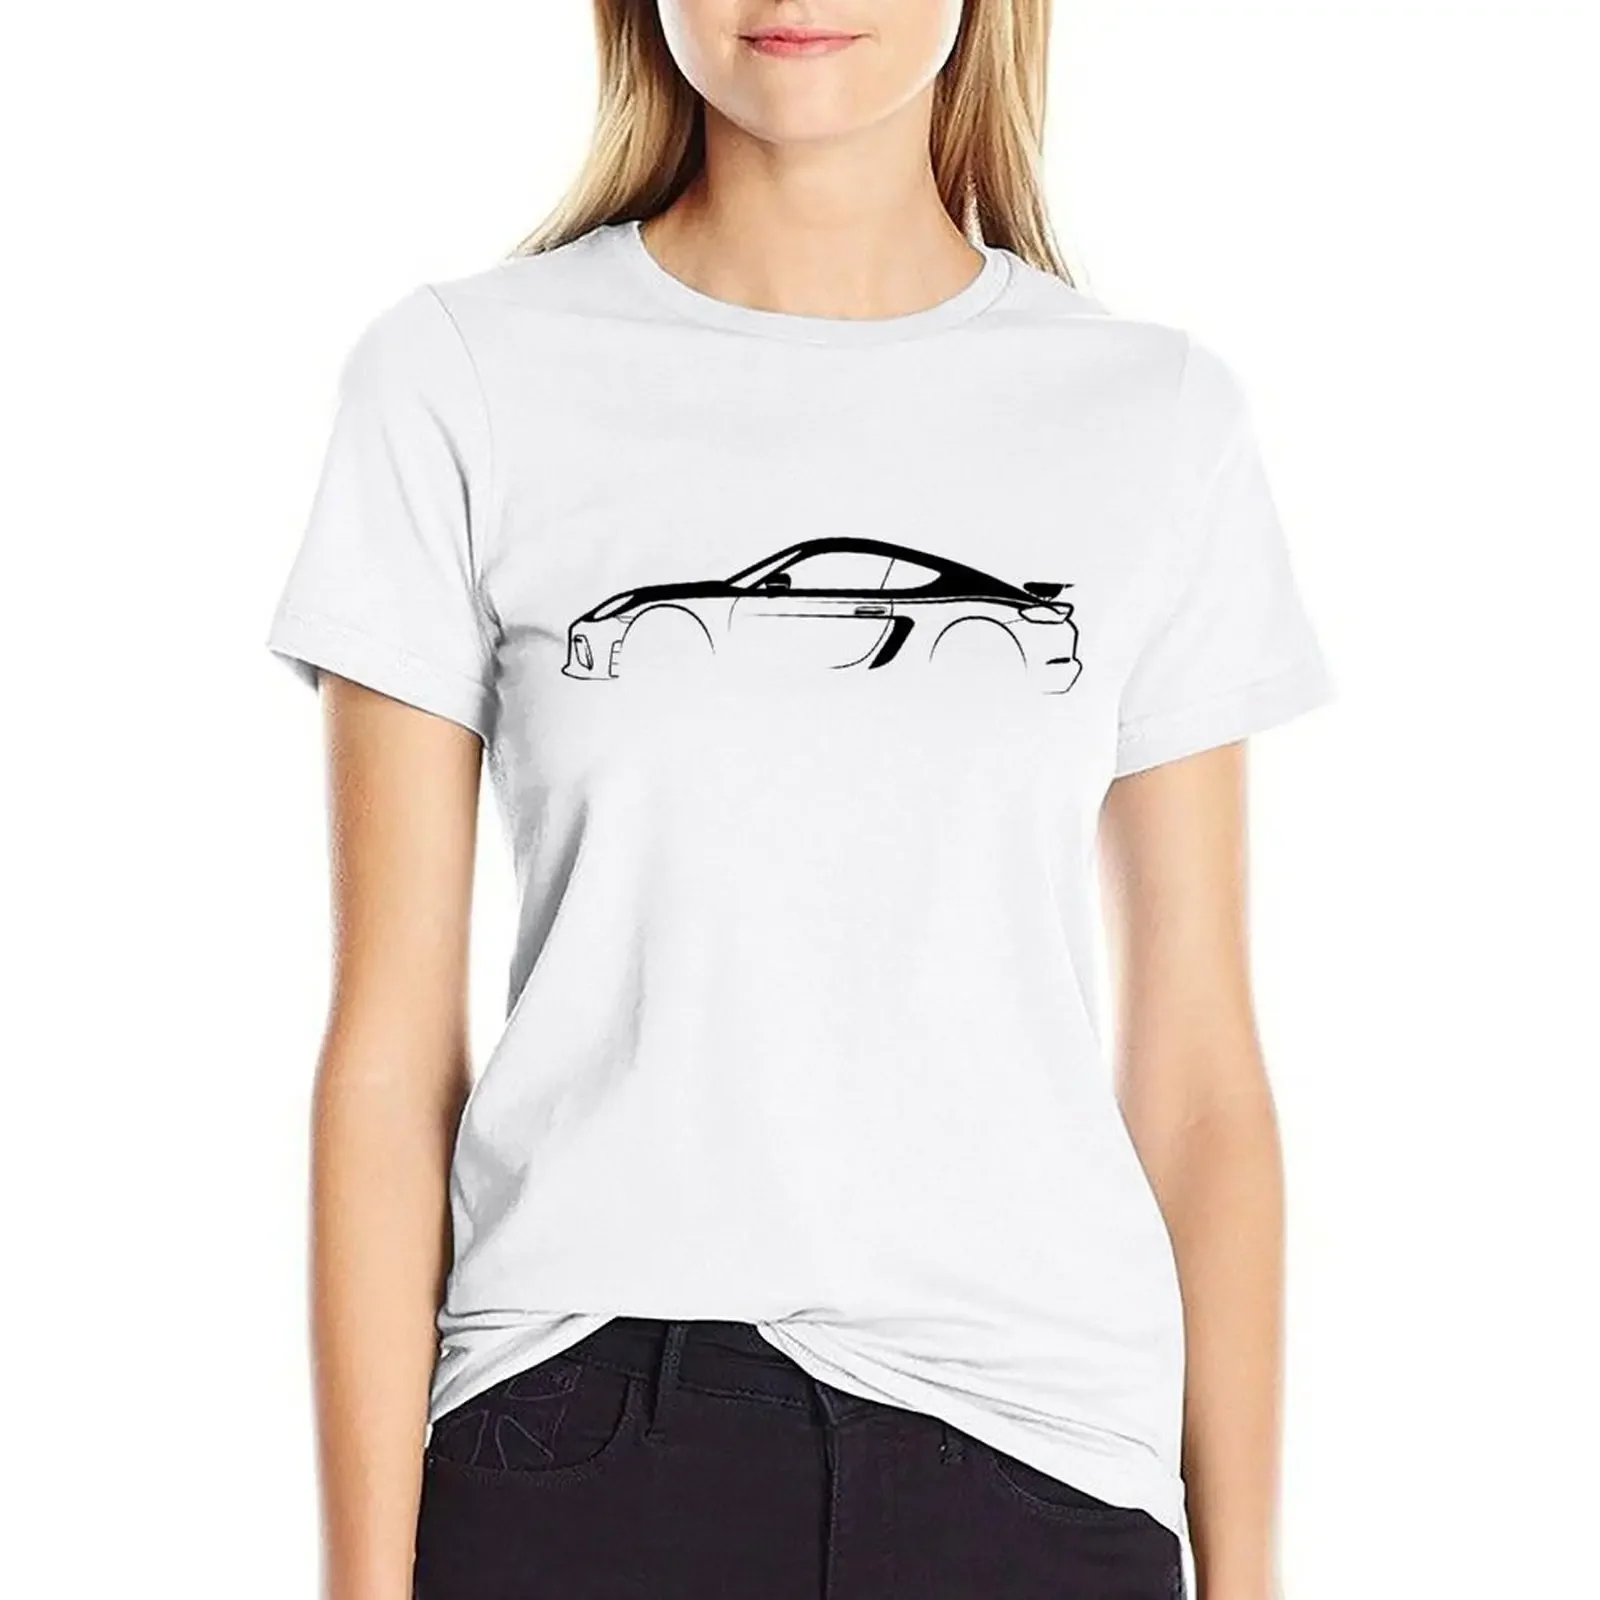 

Cayman GT4 Silhouette T-shirt graphics aesthetic clothes shirts graphic tees white t shirts for Women